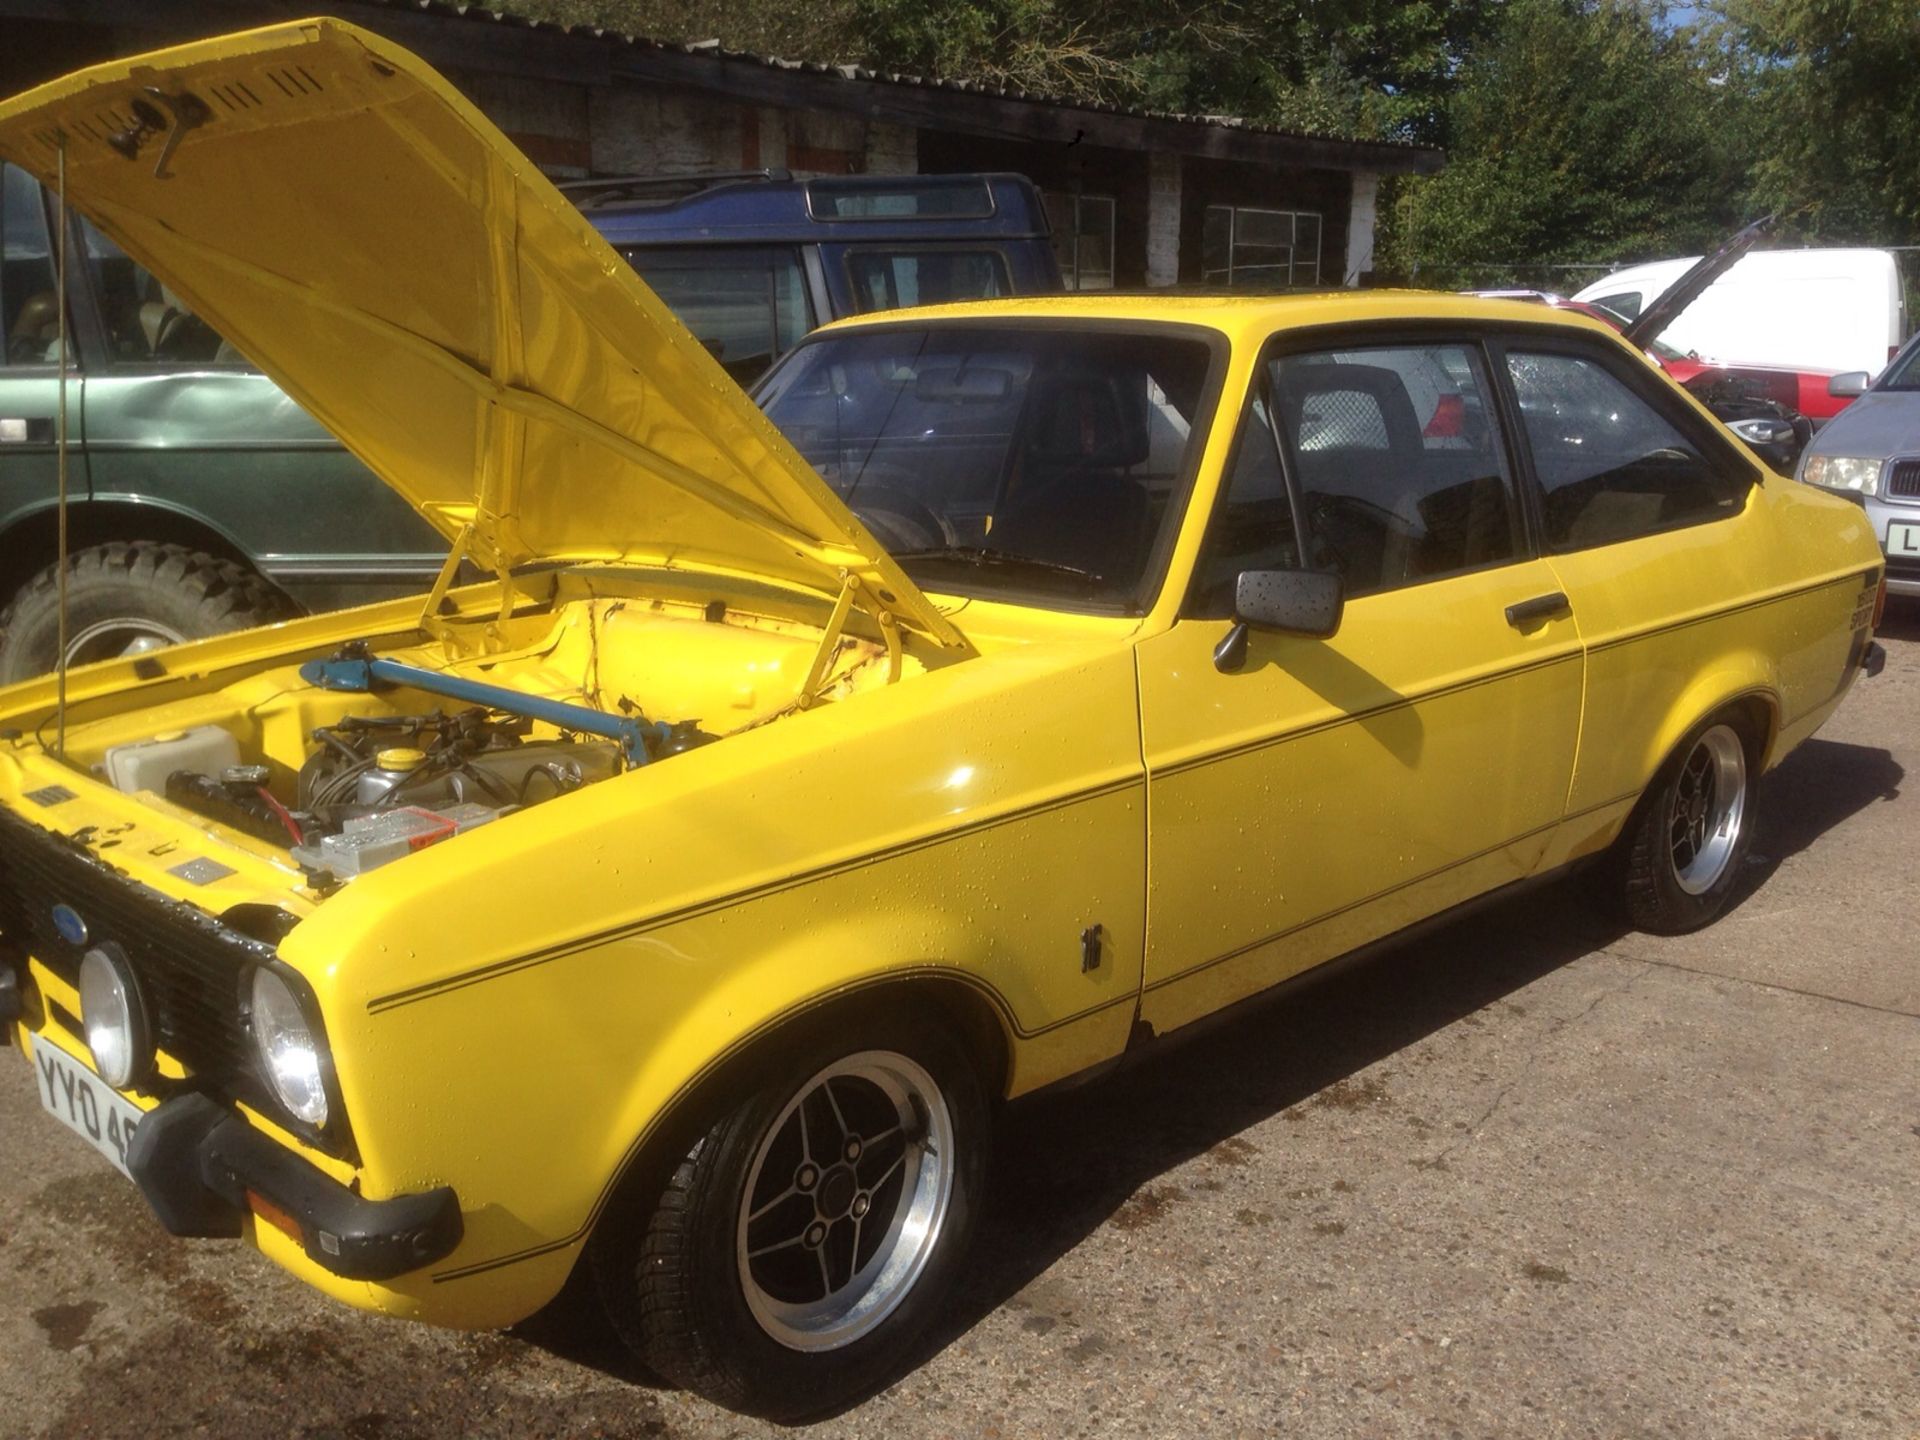 1979/T Ford Escort mk2 1600 Sport - in Signal yellow -  UK car  (545 miles) since rebuild - Image 24 of 54